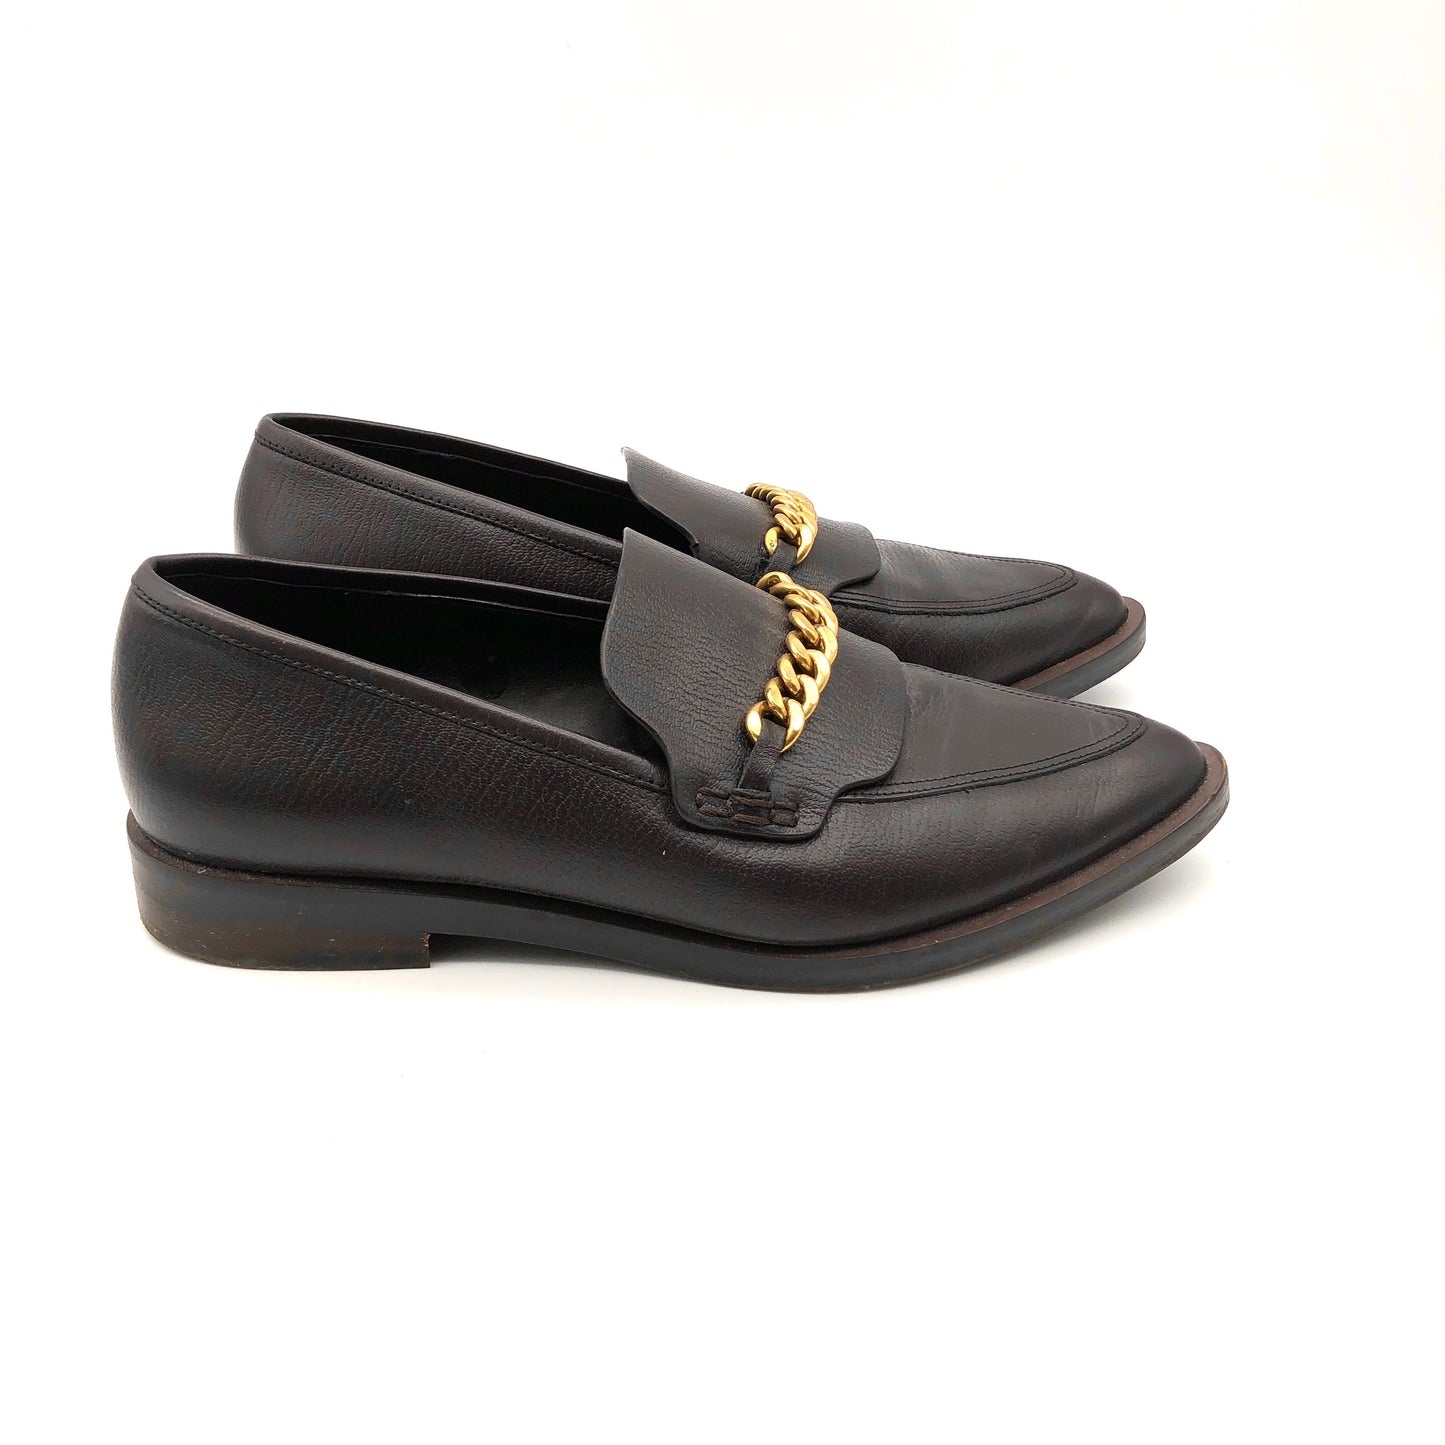 Shoes Flats Loafer Oxford By Rebecca Minkoff  Size: 10.5